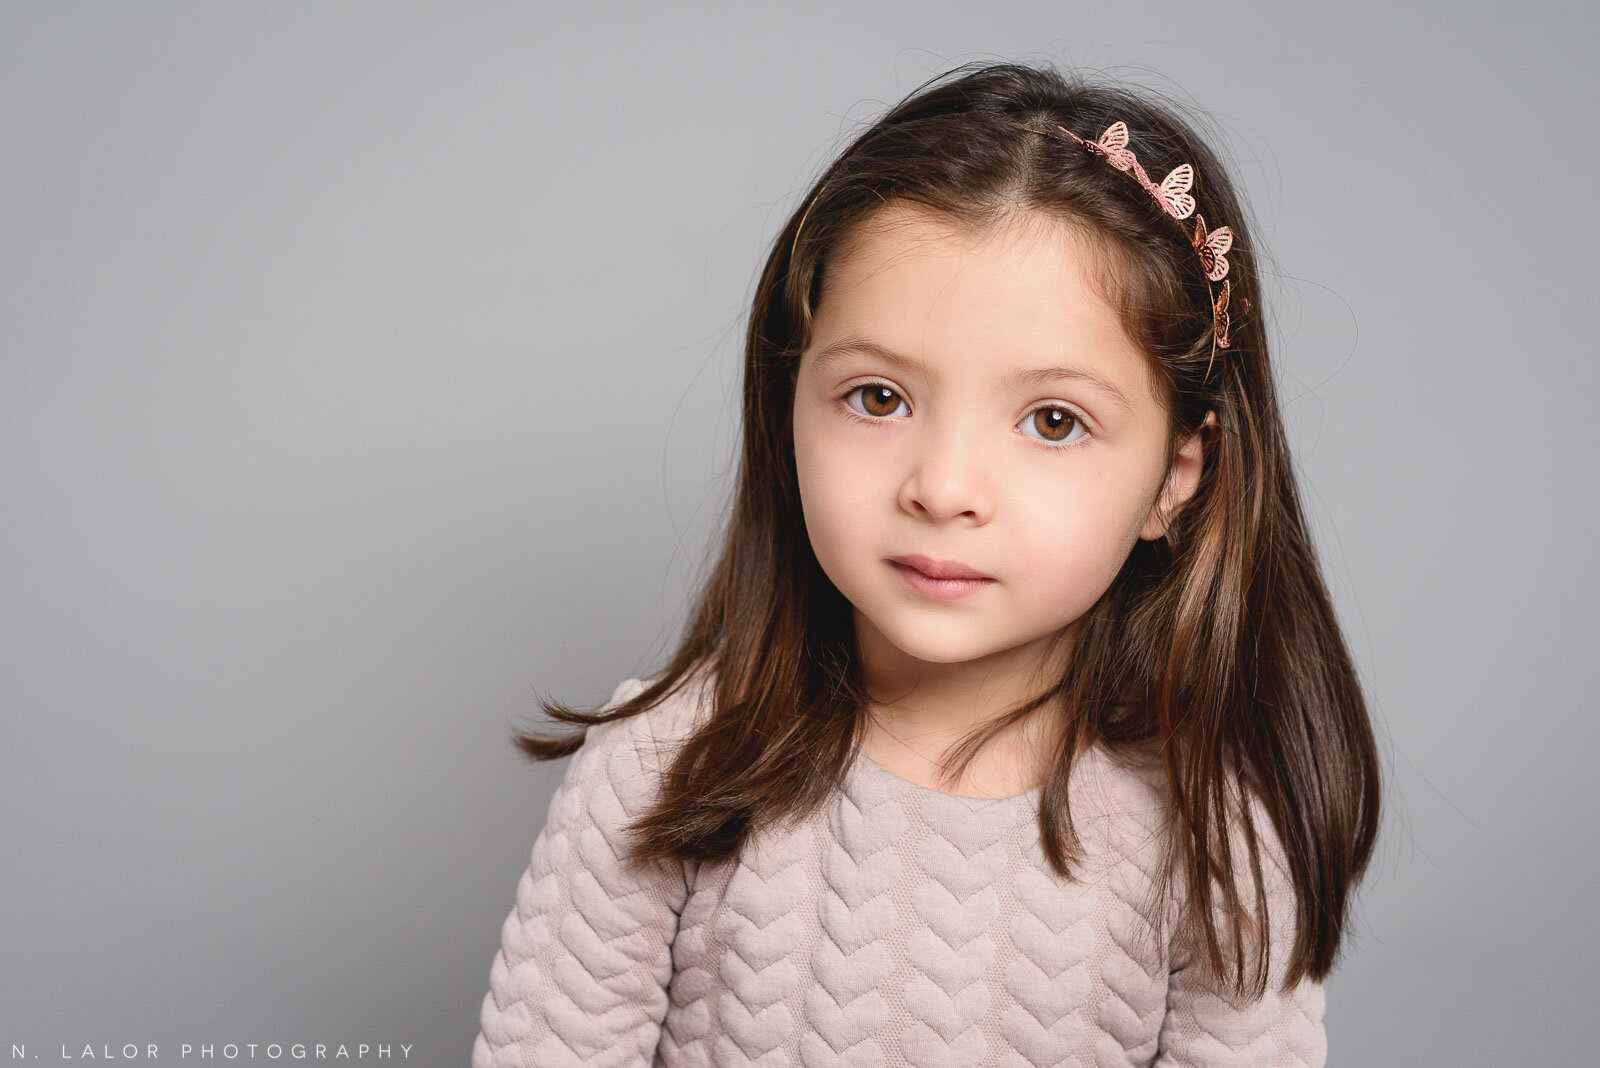 nlalor-photography-2016-12-13-studio-family-two-girls-greenwich-connecticut-20.jpg